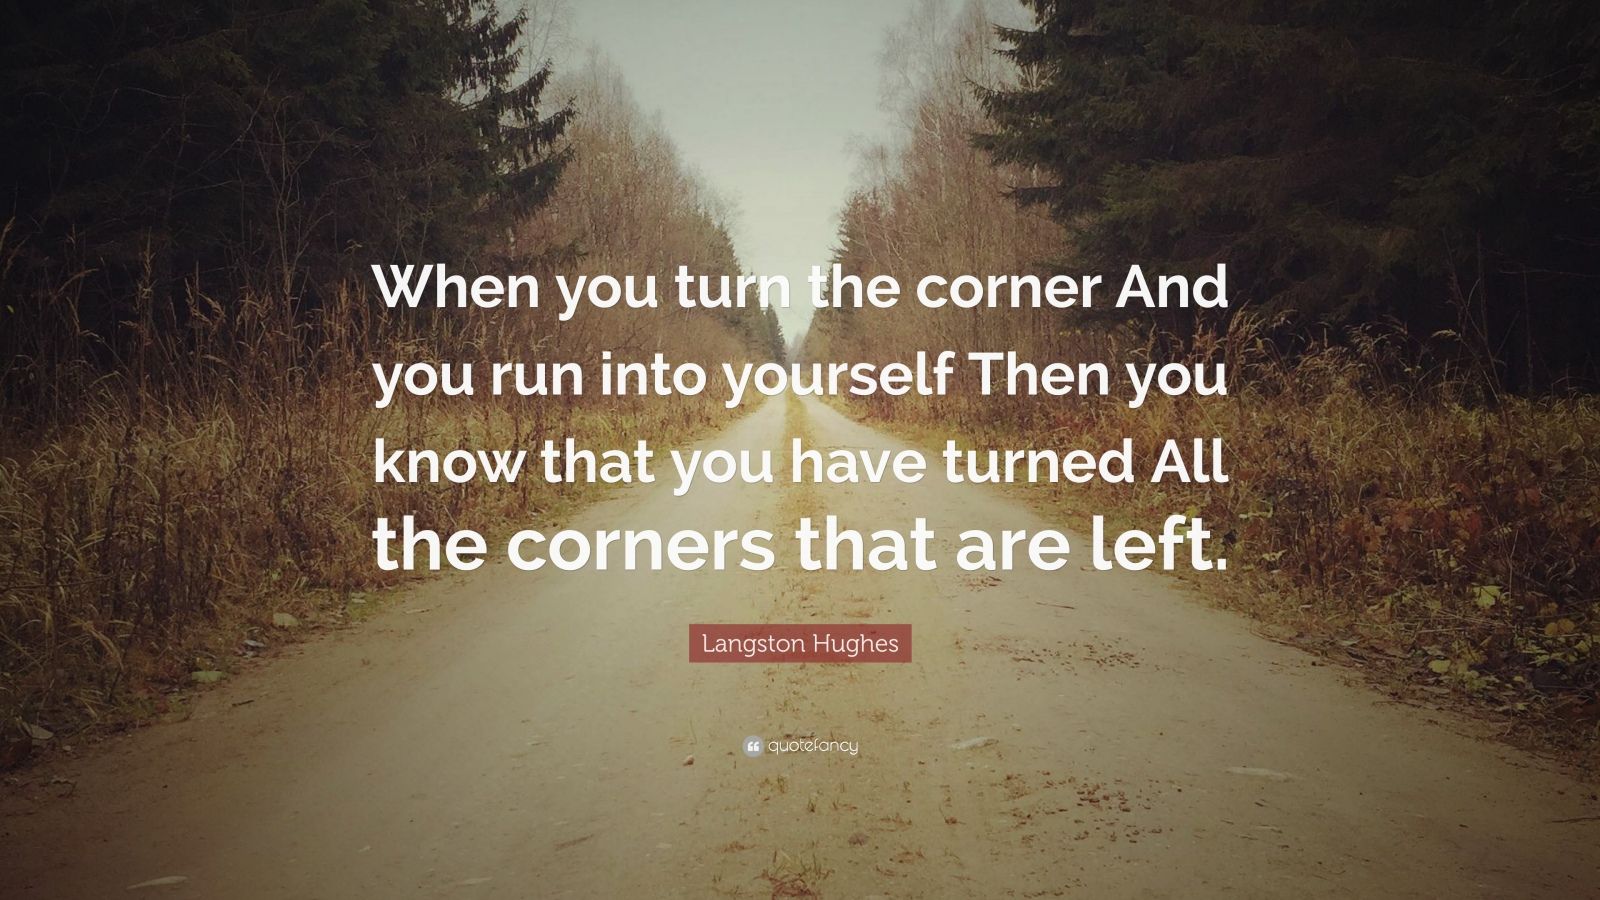 Langston Hughes Quote: “When you turn the corner And you run into